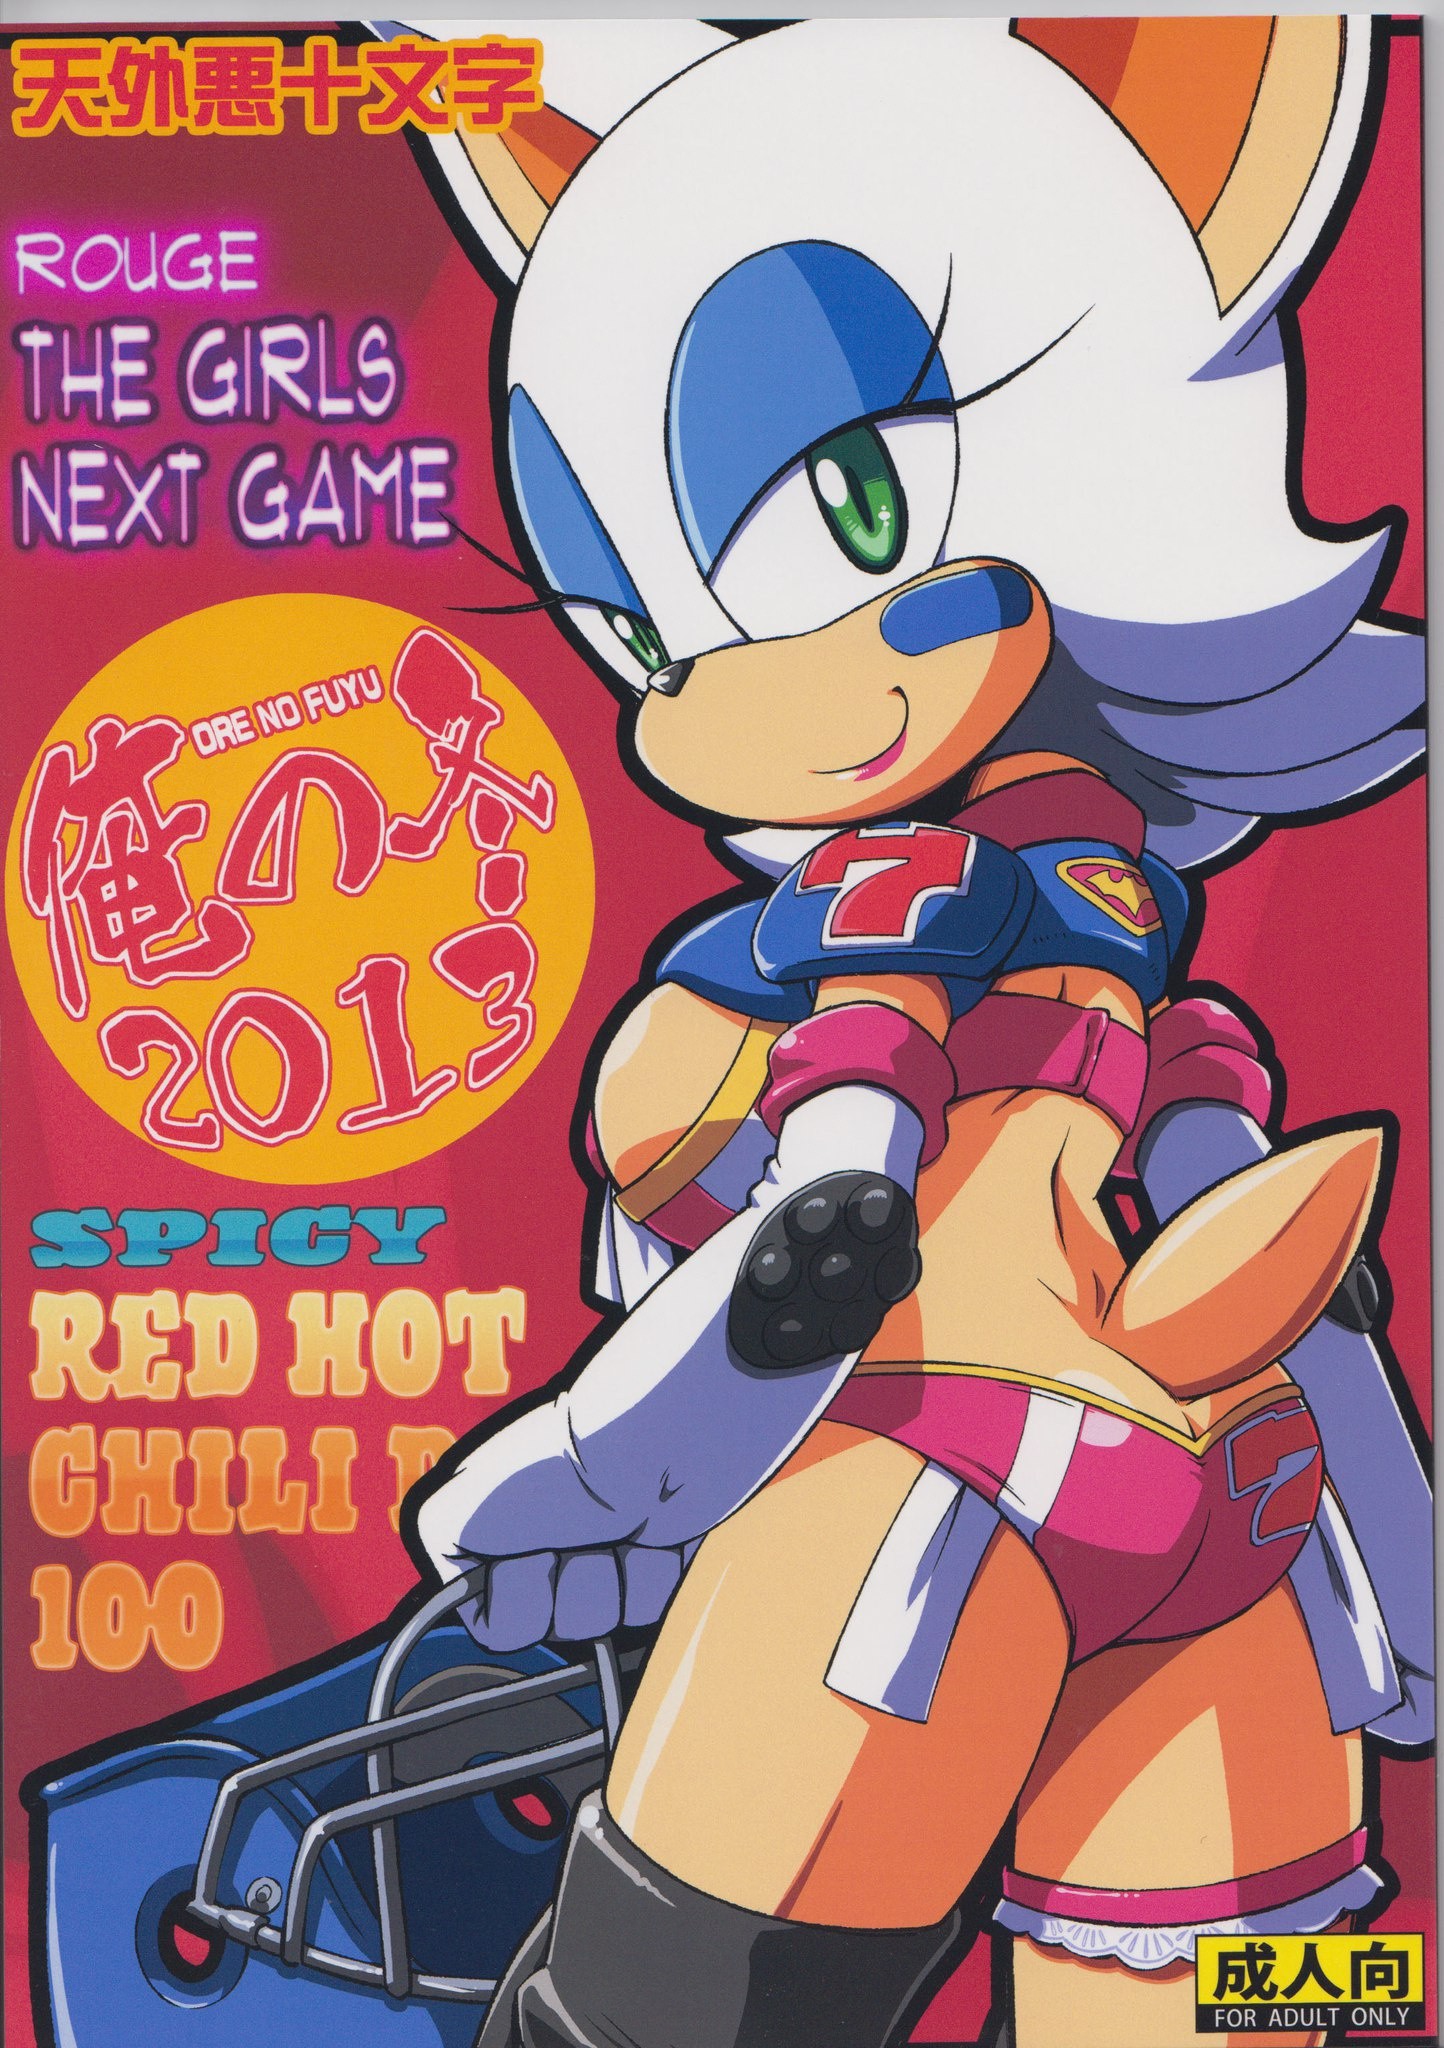 Rouge The girl next game